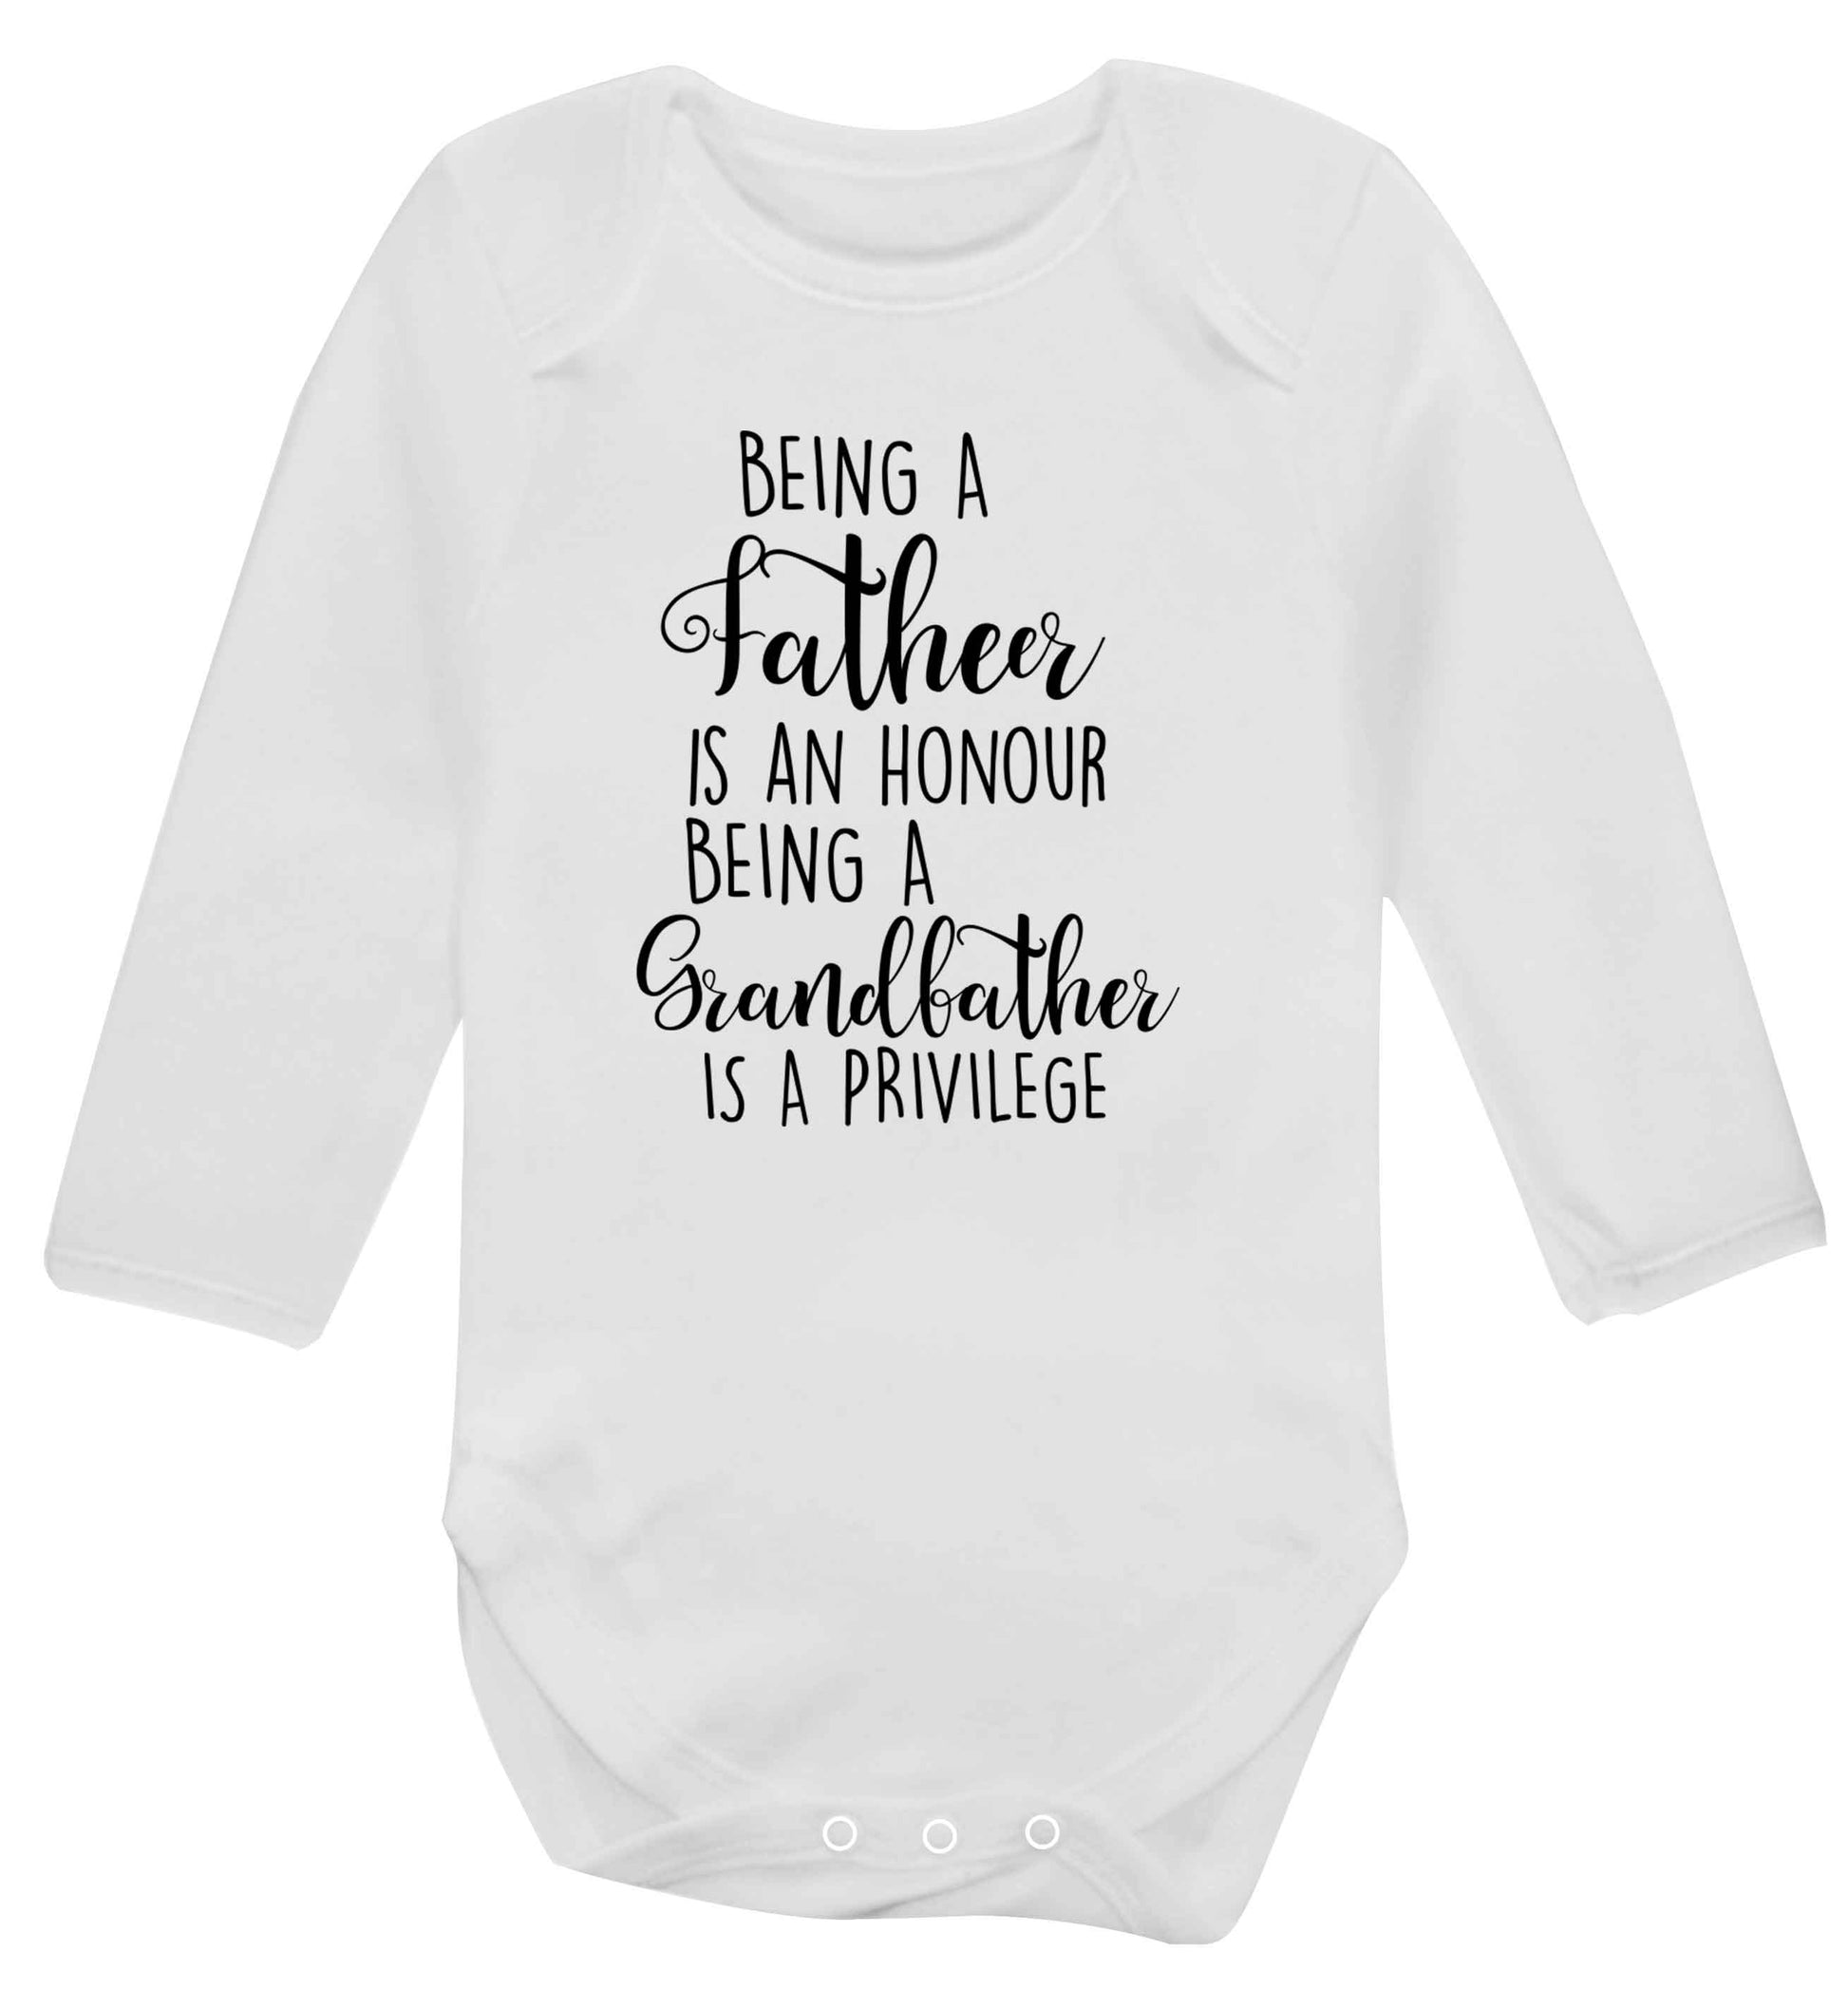 Being a father is an honour being a grandfather is a privilege Baby Vest long sleeved white 6-12 months